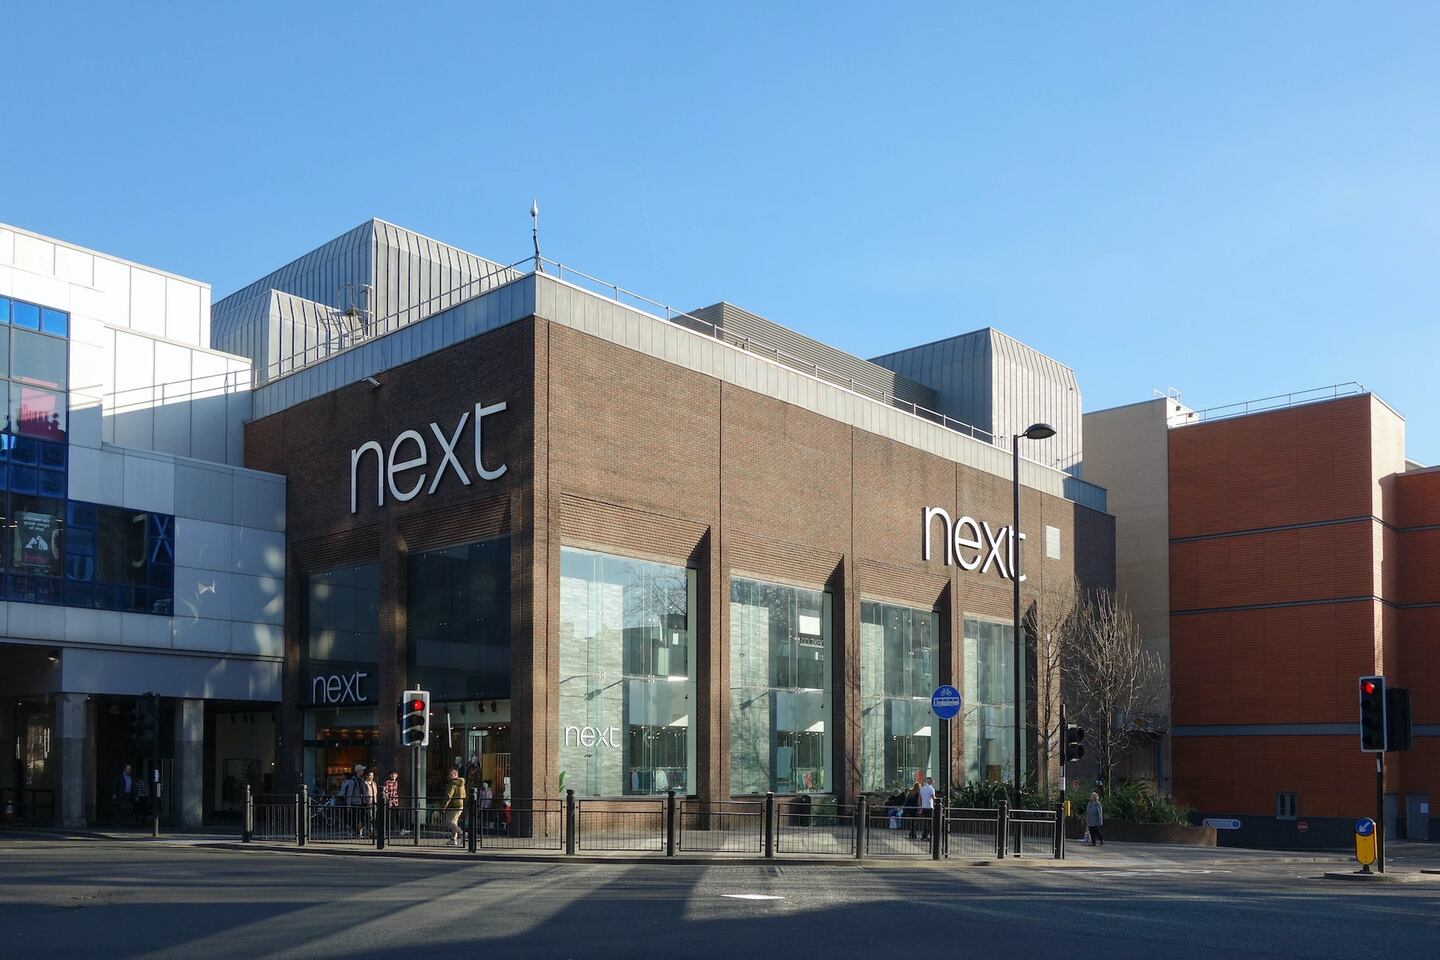 The exterior of a Next store.